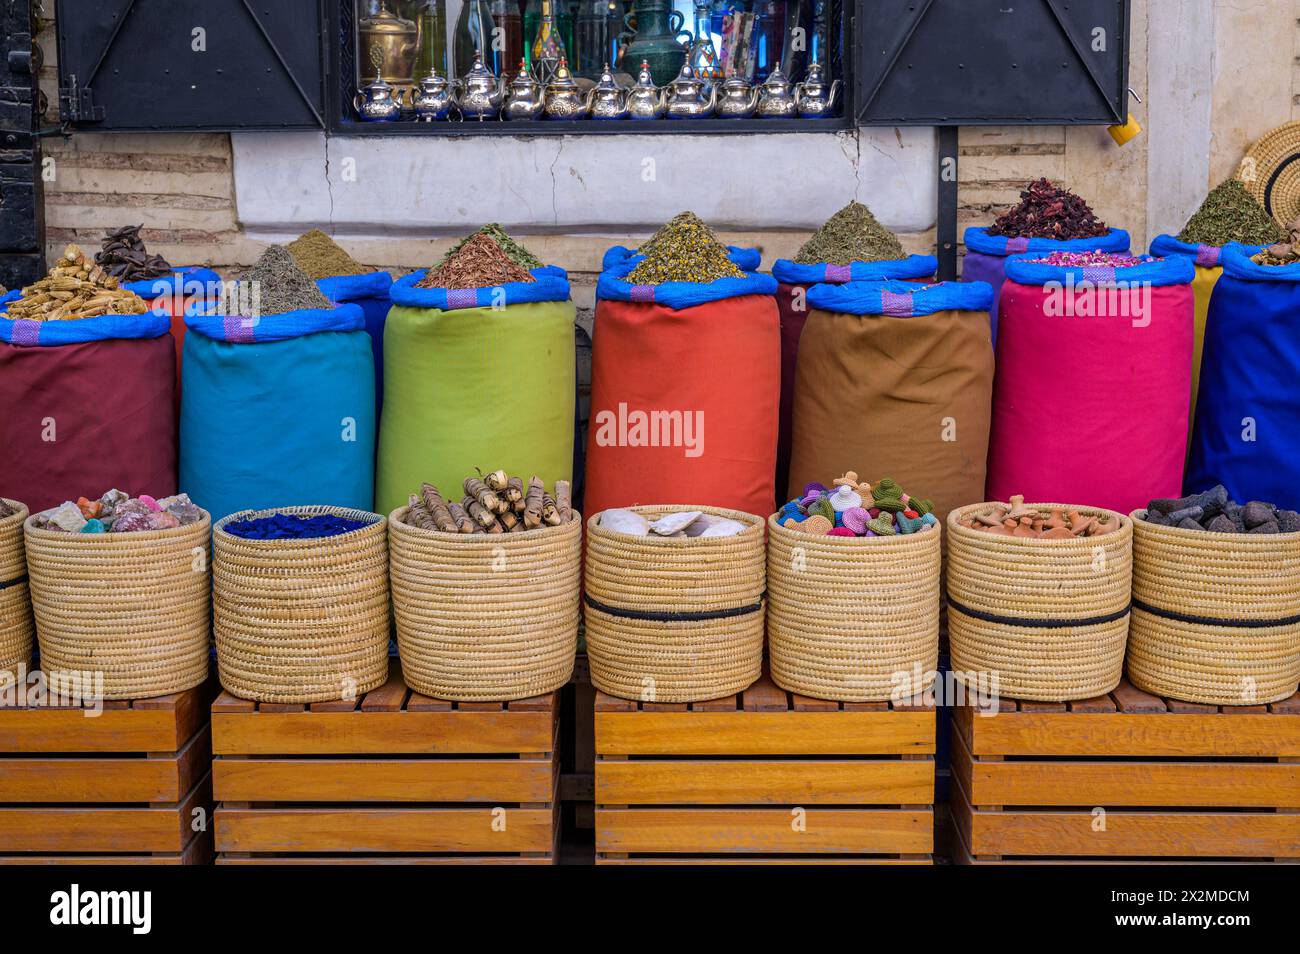 Colorful sacks of aromatic spices and traditional woven baskets showcased in a Moroccan market, reflecting the rich culinary culture. Stock Photo